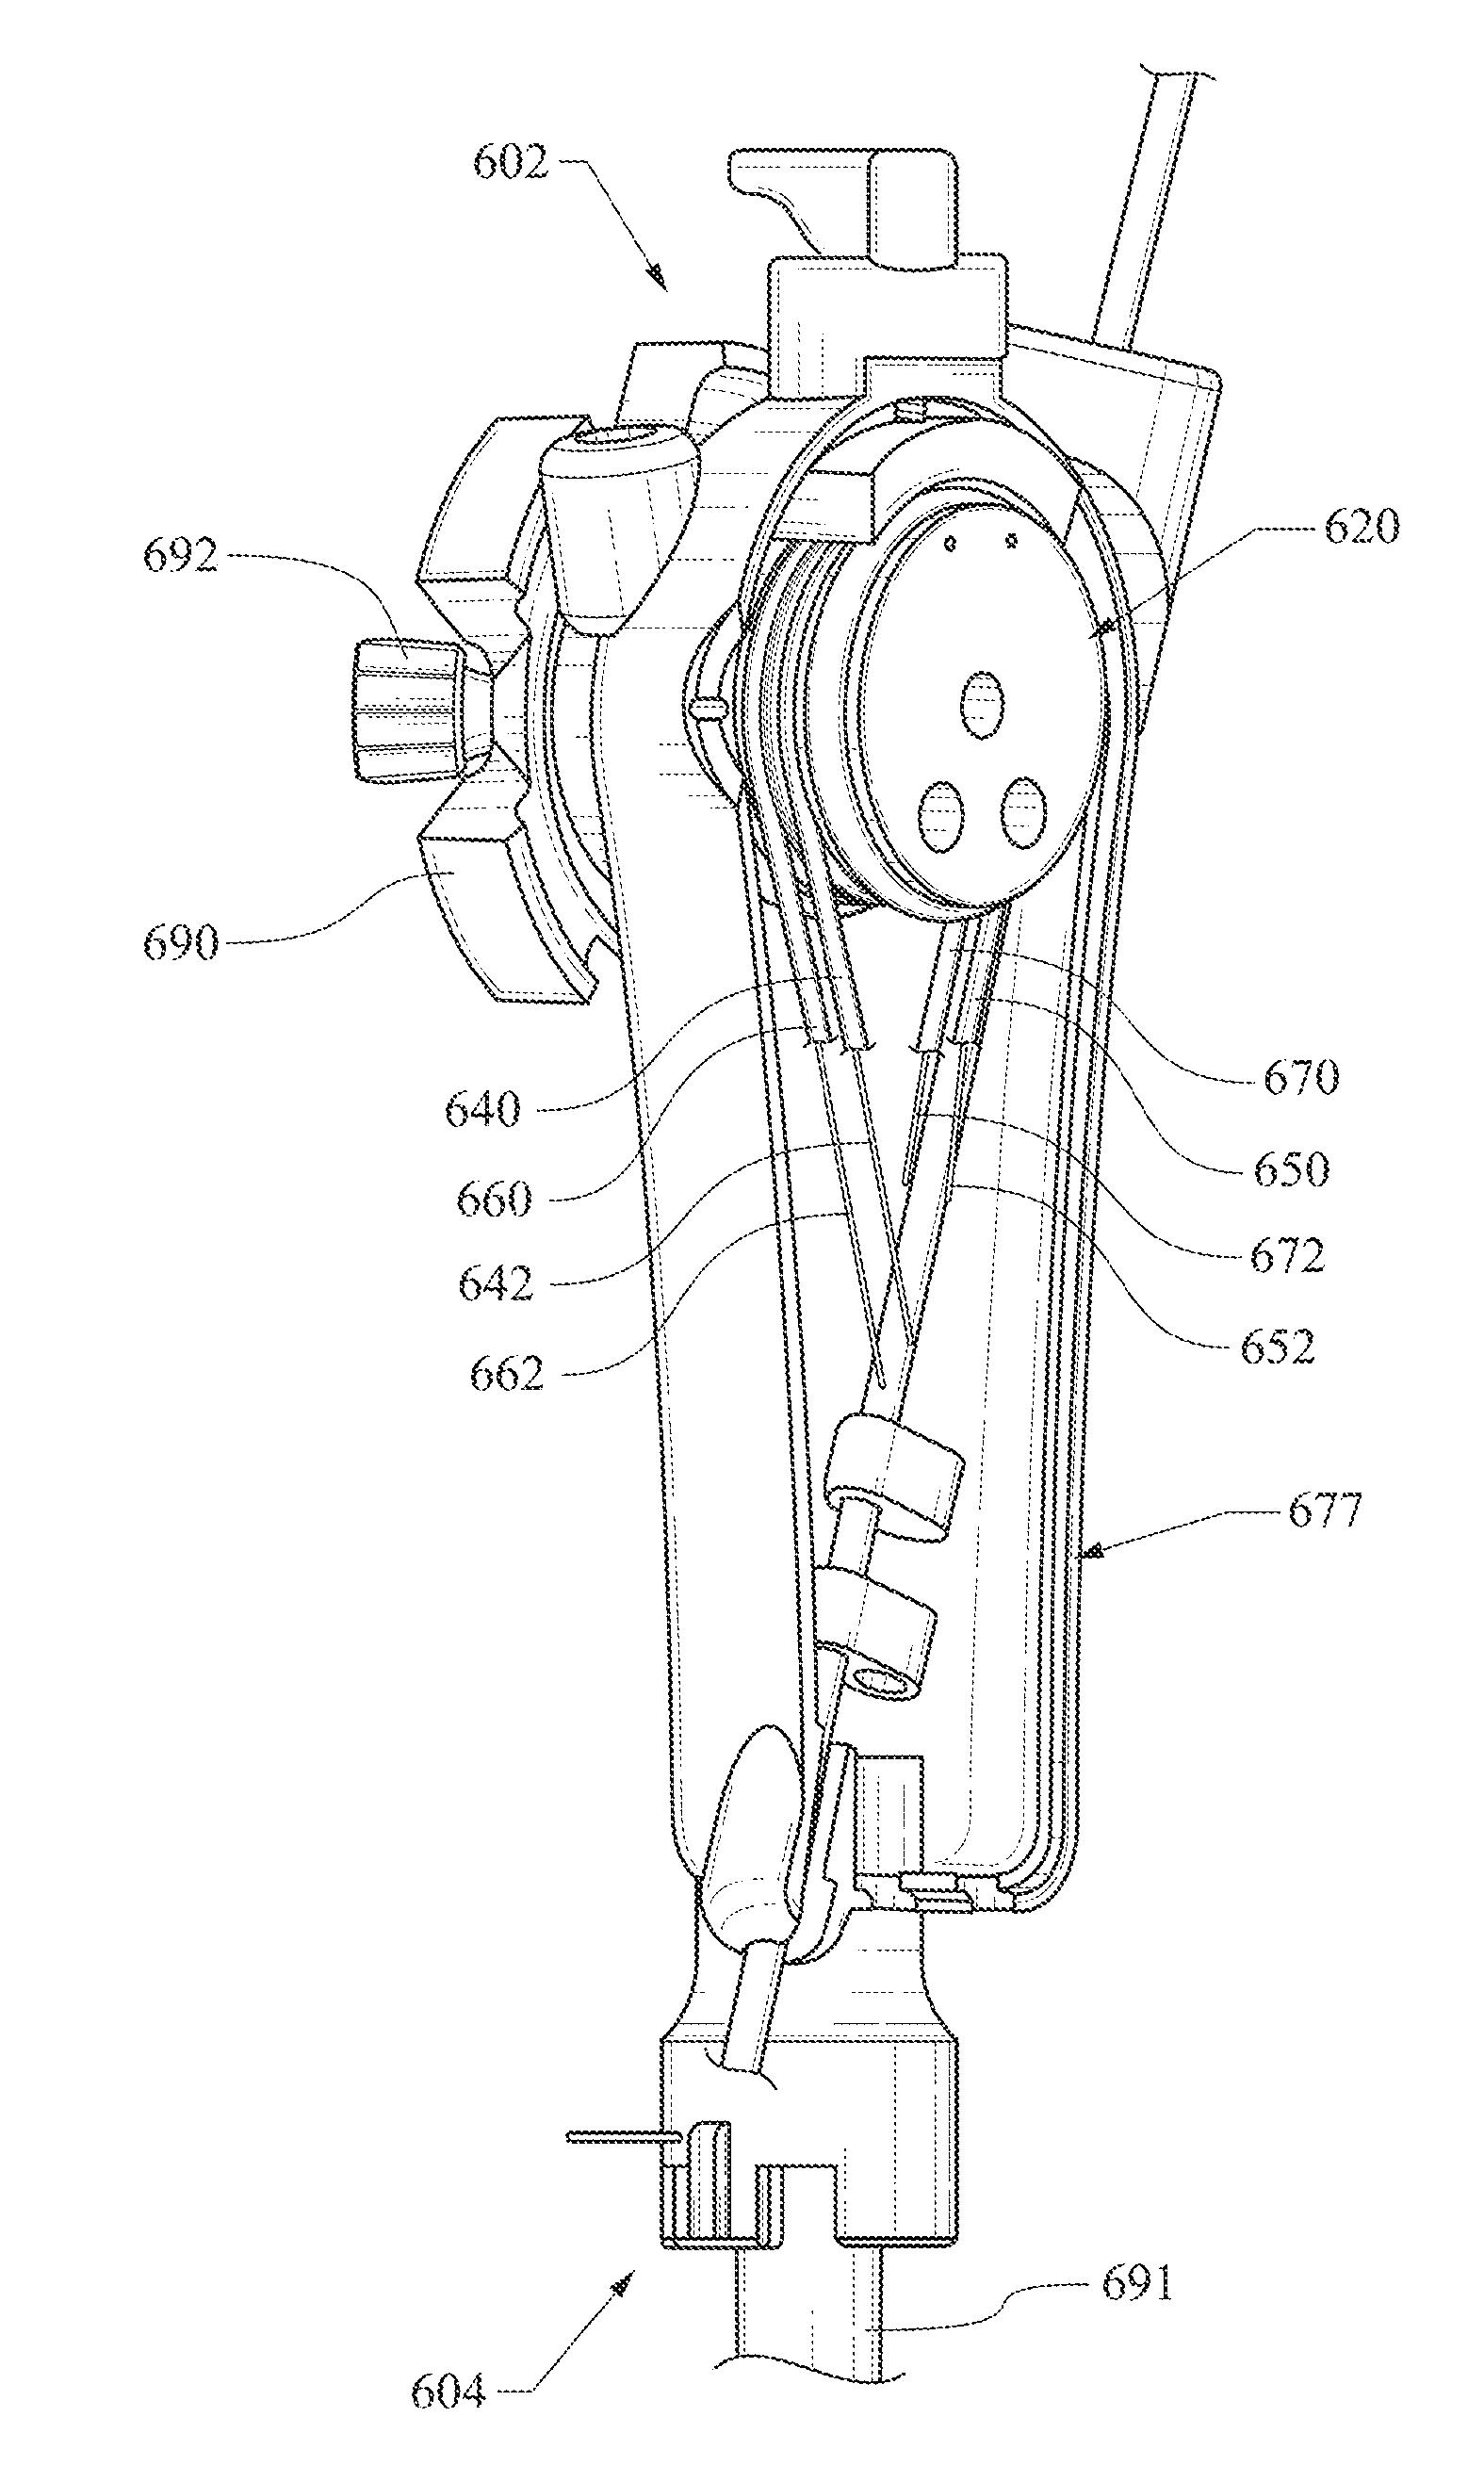 Mechanism of small drive wire retention on spool